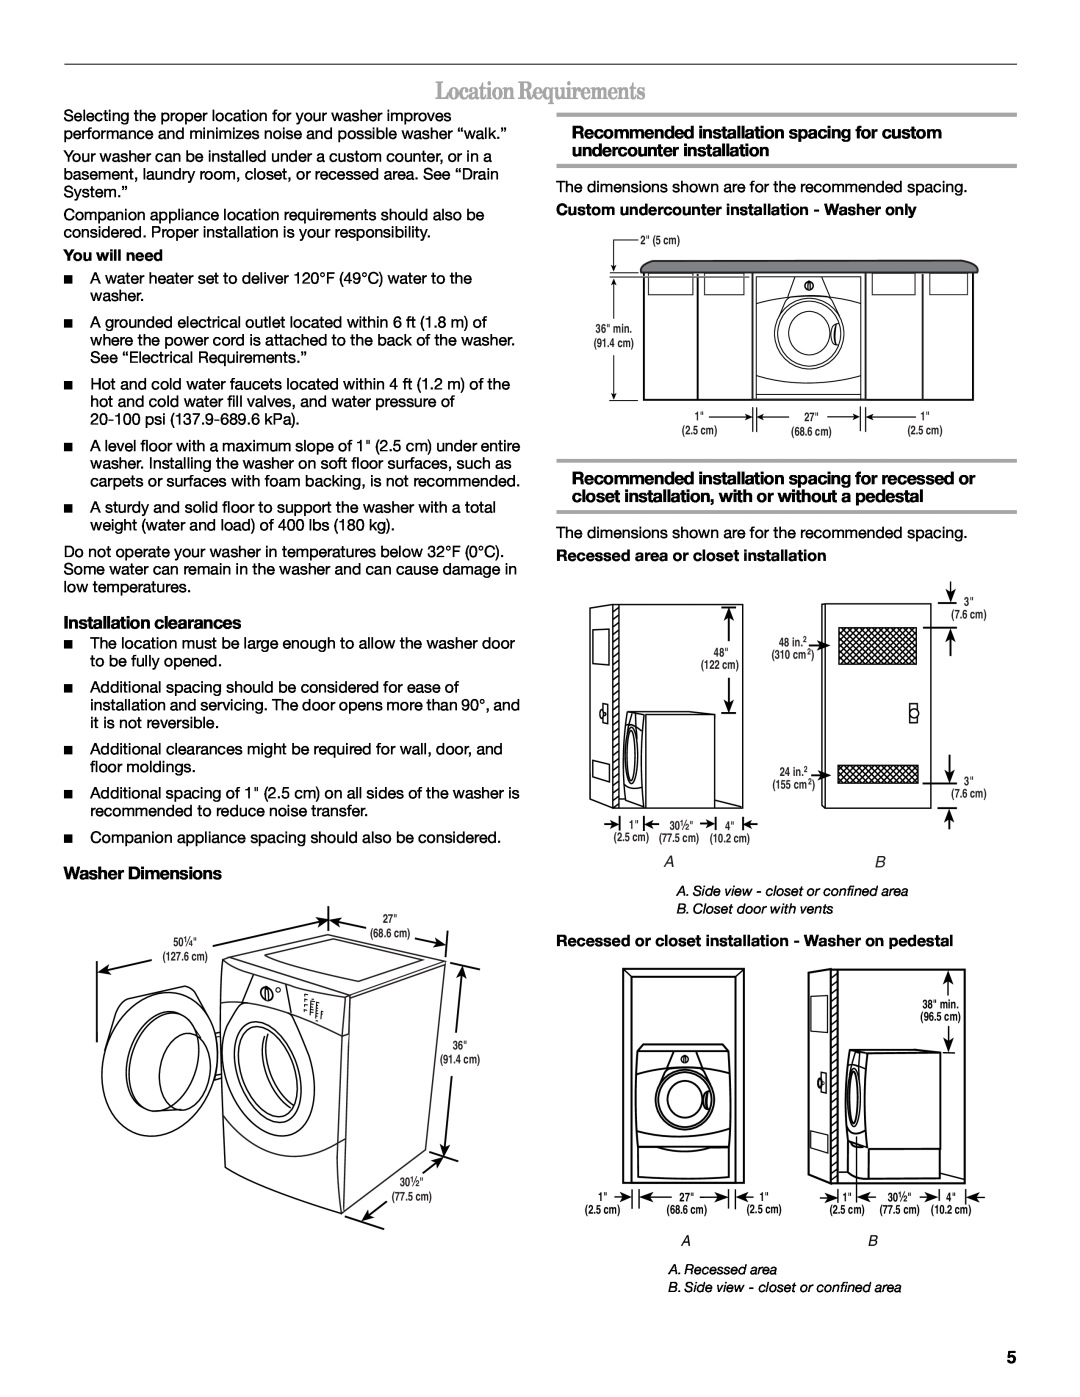 Whirlpool W10063560 manual Location Requirements, Recommended installation spacing for custom undercounter installation 